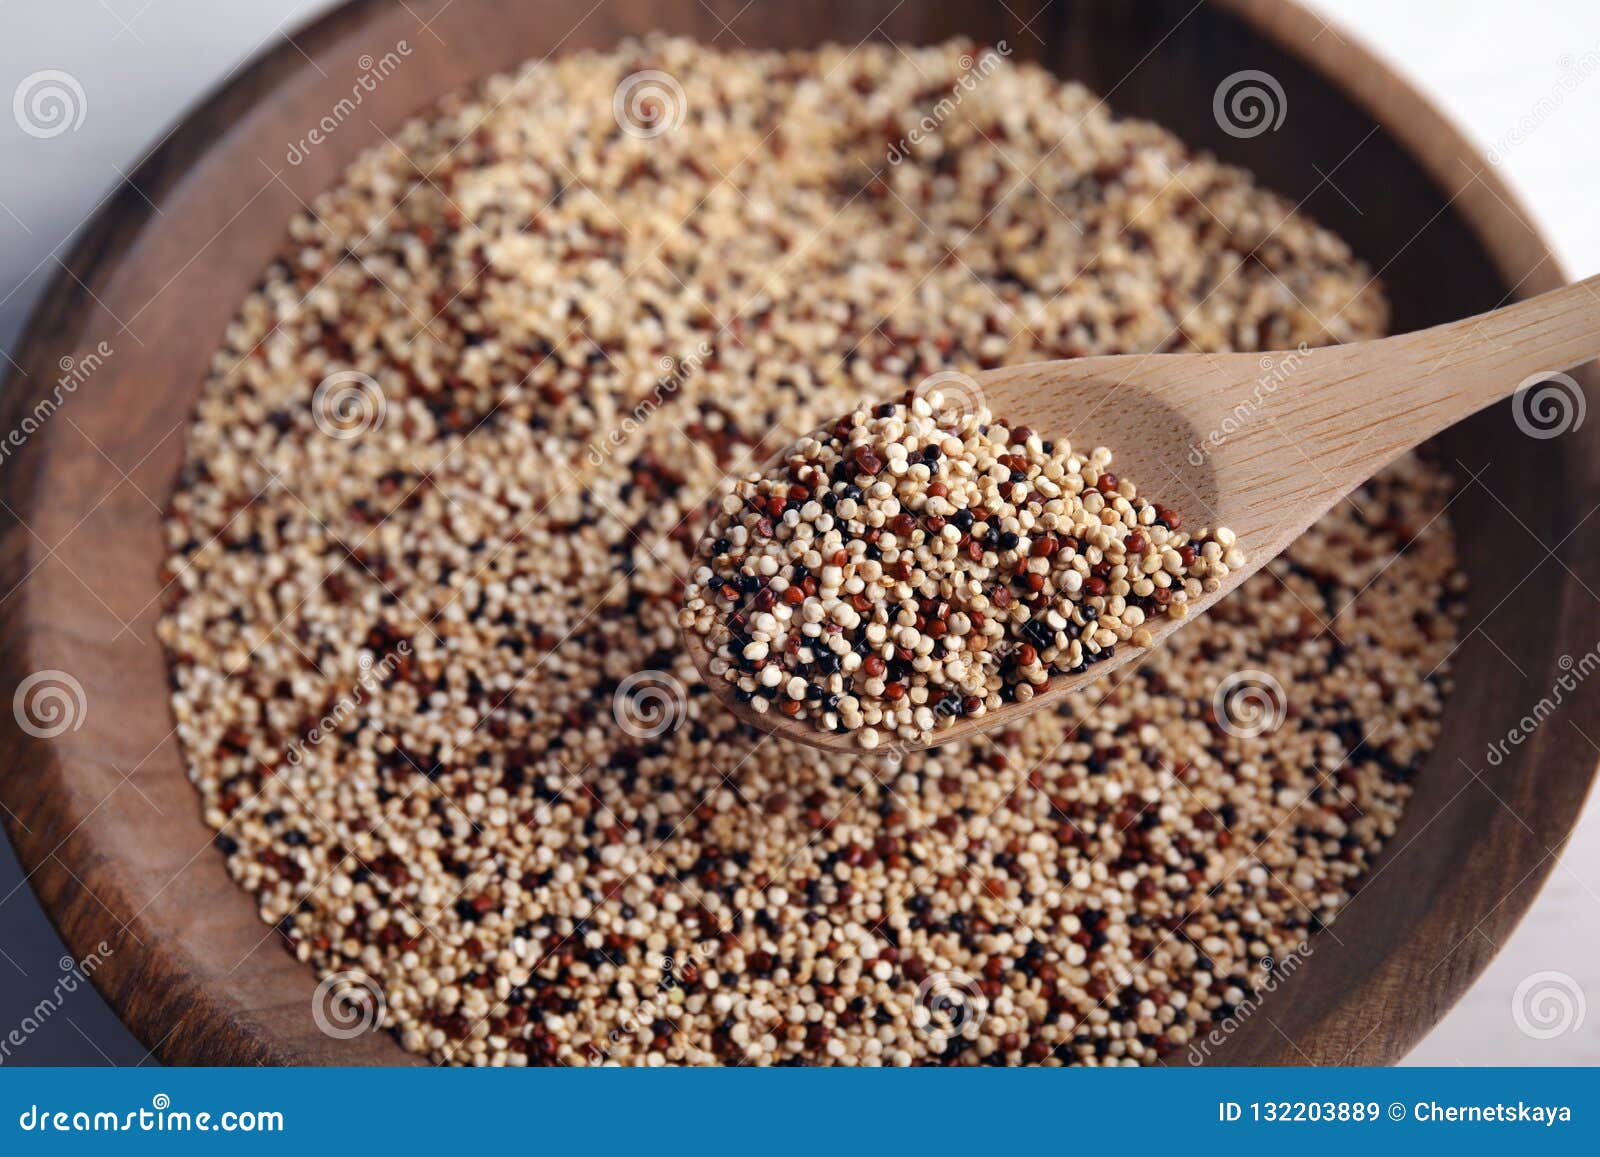 Spoon with Mixed Quinoa Seeds Over Plate Stock Image - Image of diet ...